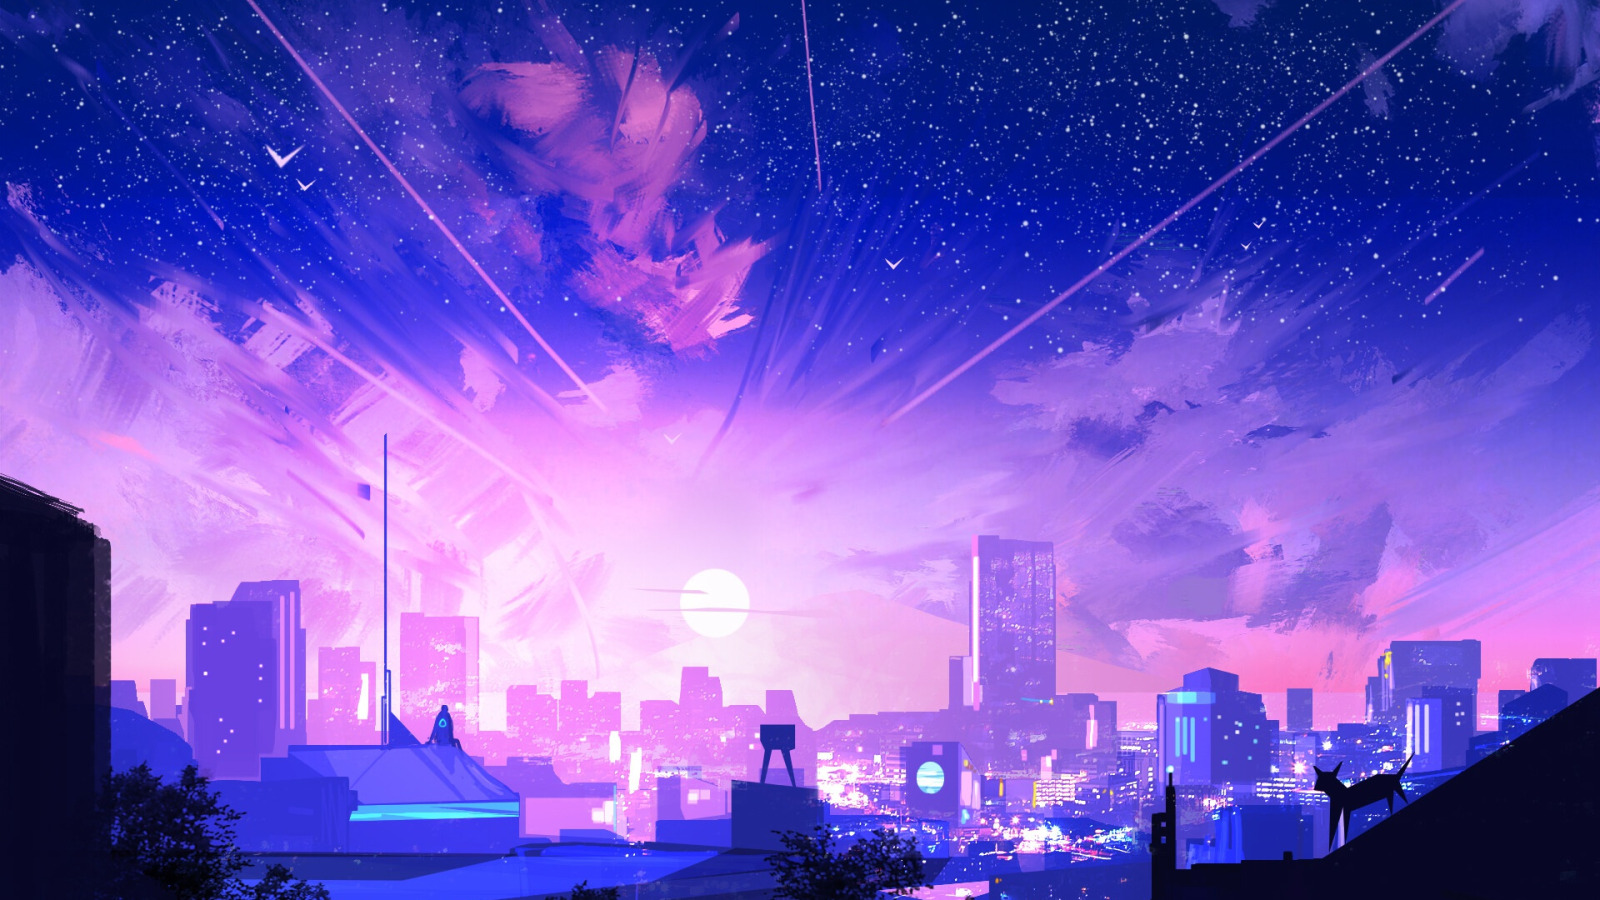 Background Of Star Night Illustration In Quiet City, Night, Night Sky,  House Background Image And Wallpaper for Free Download